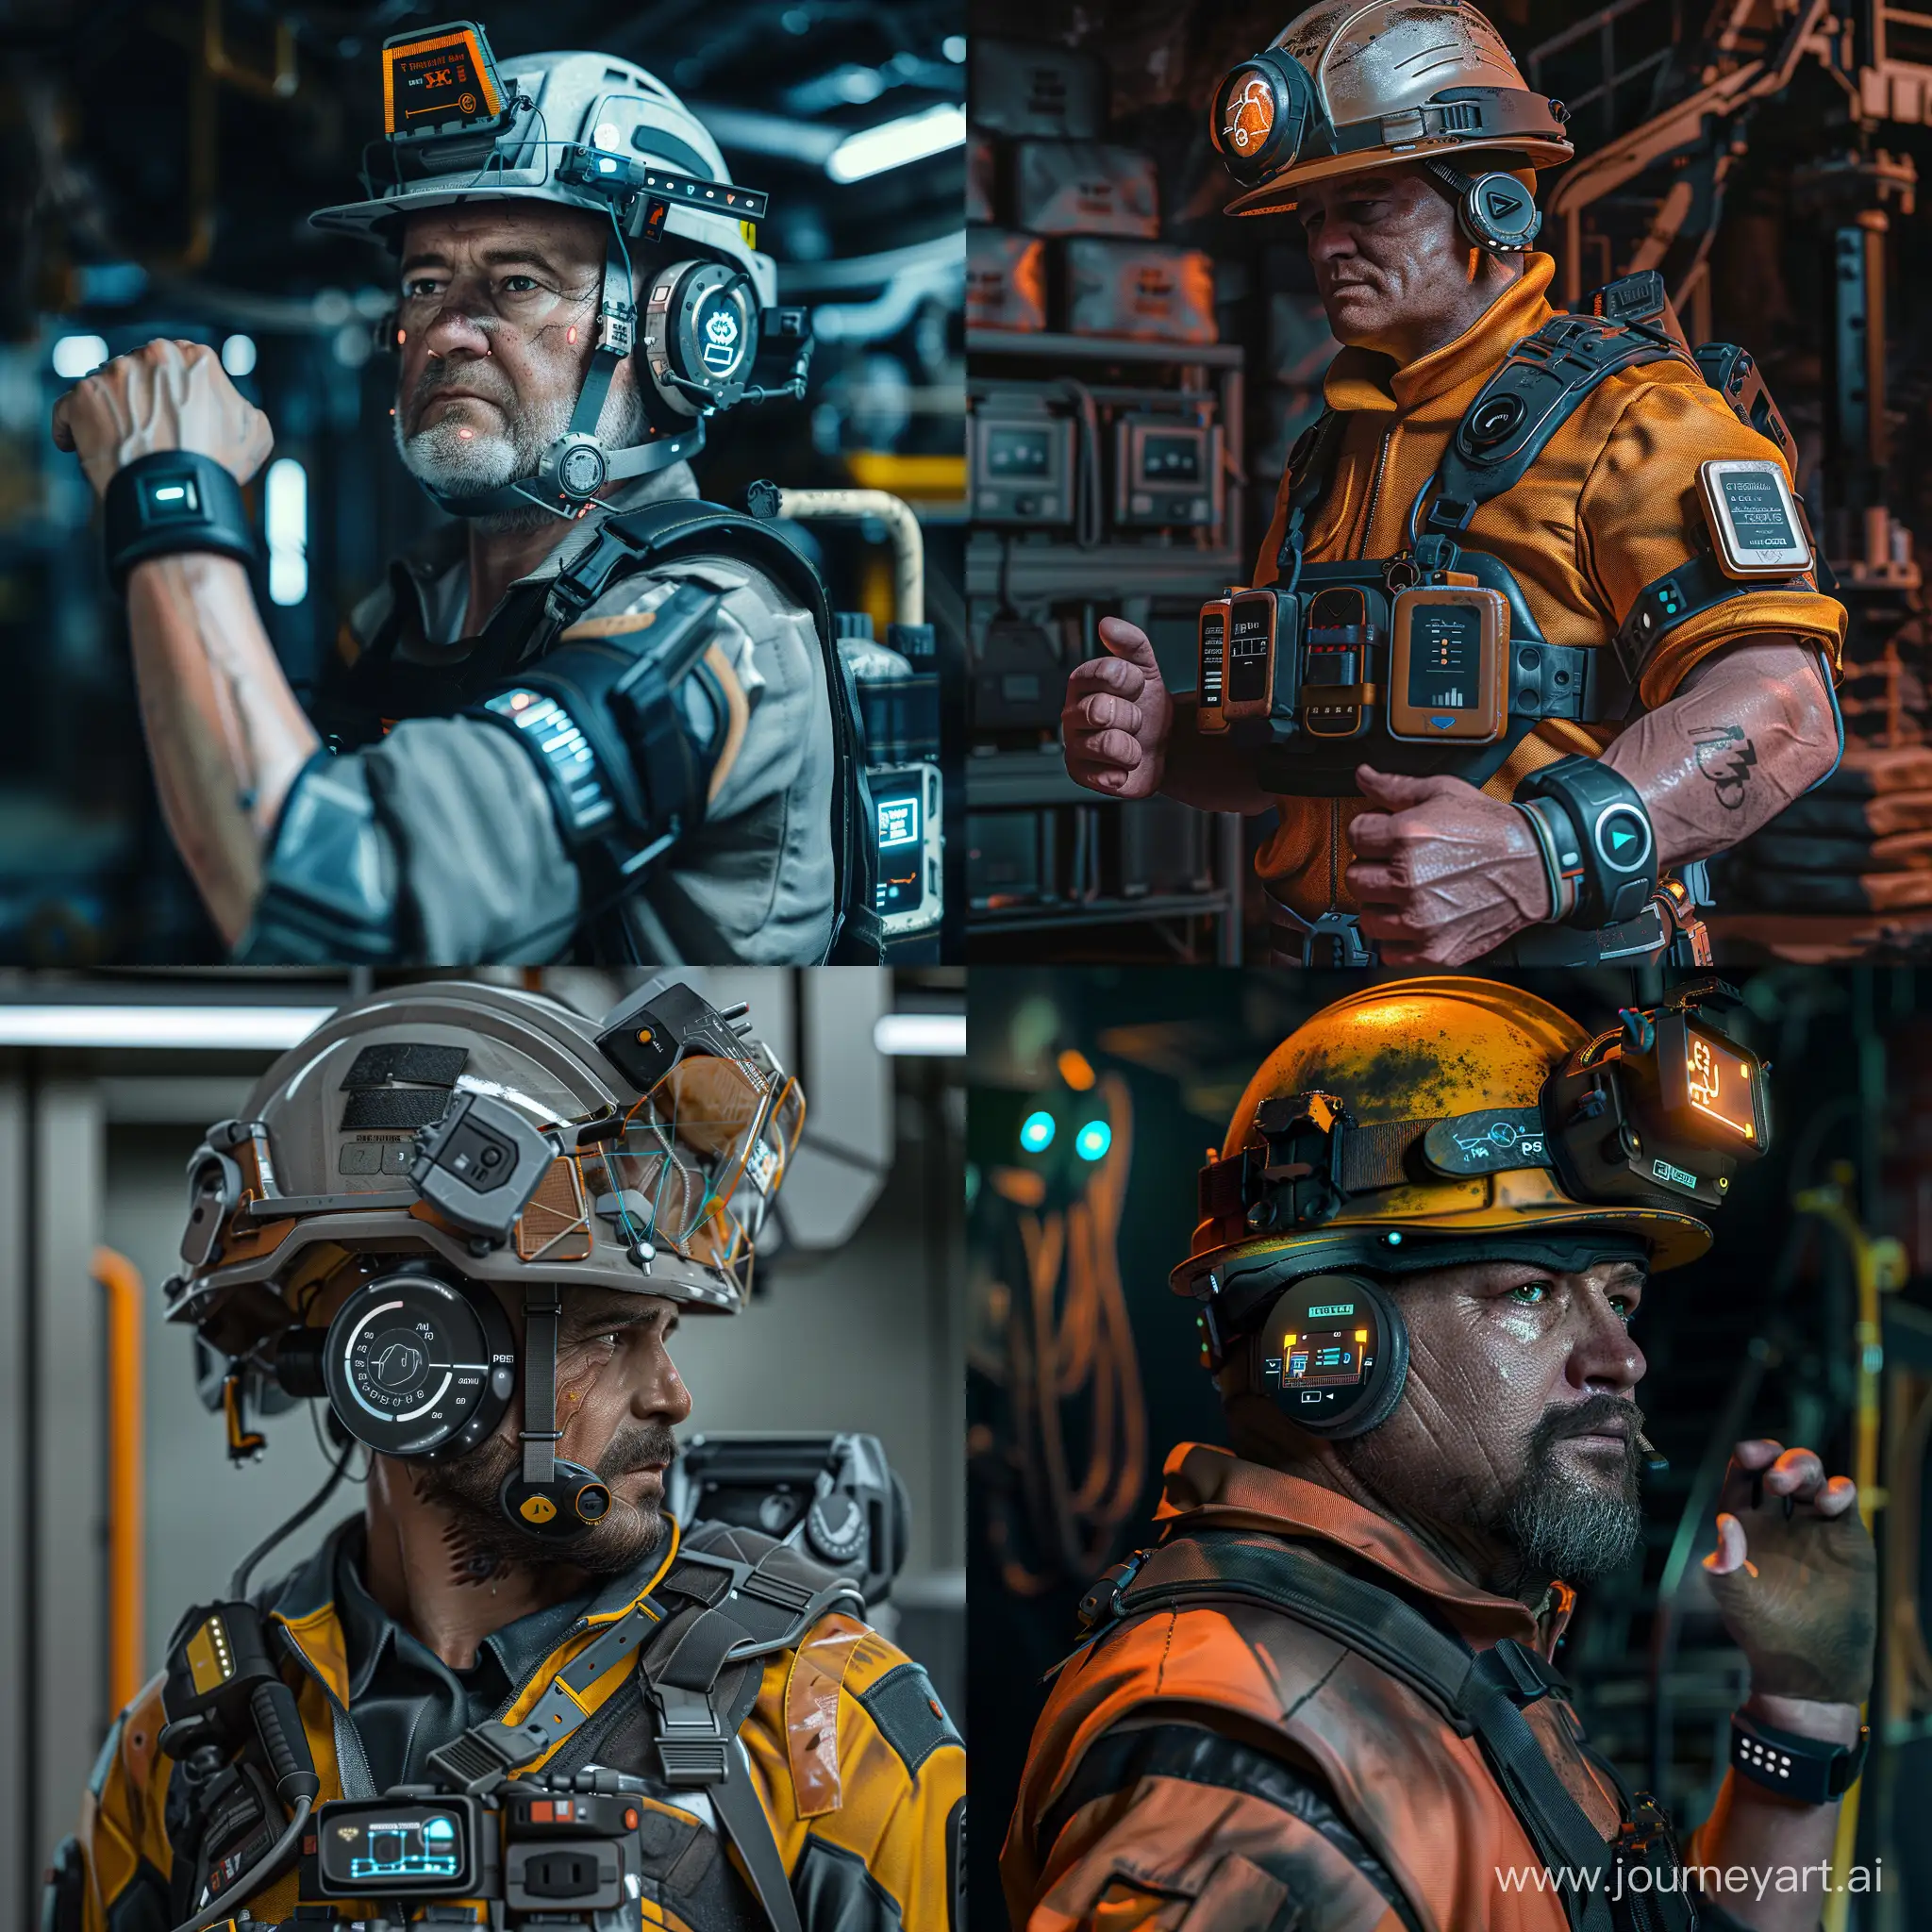  a full body realistic miner is wearing a smart hardhat with sensors that can detect gas leaks, methane levels, and other hazards. He is also wearing a smart  wristband that can track his location and vital signs, and can send out an alert if he falls or becomes unresponsive. These personal protective equipment (PPE) devices help to keep the miner safe while he works in the dangerous environment of an underground mine. and also trak his productivity and efficency